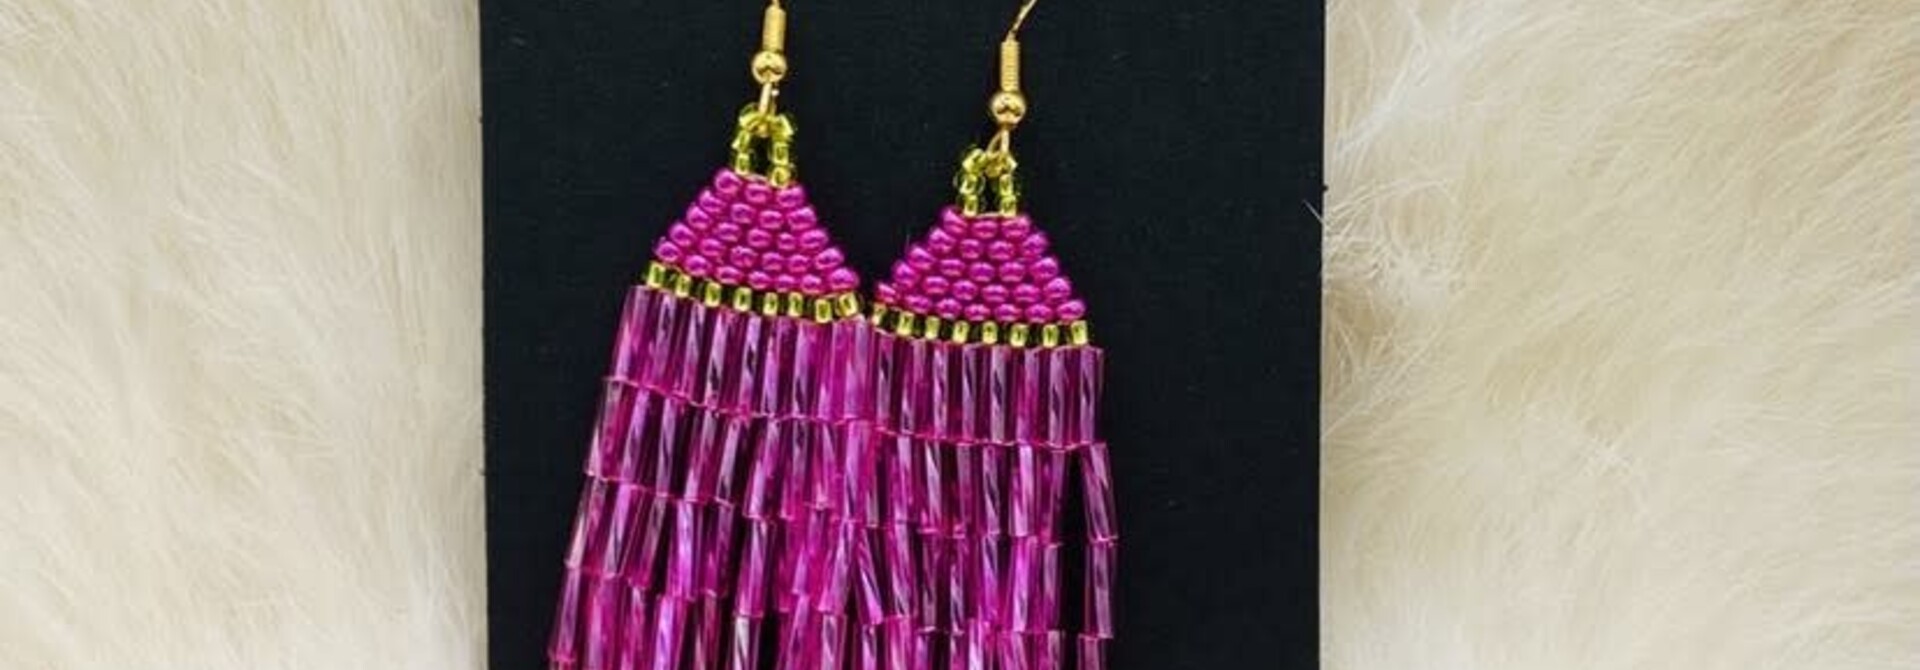 Beaded Earrings by Little Spark Cree-ations / LRG. - Pink & Gold